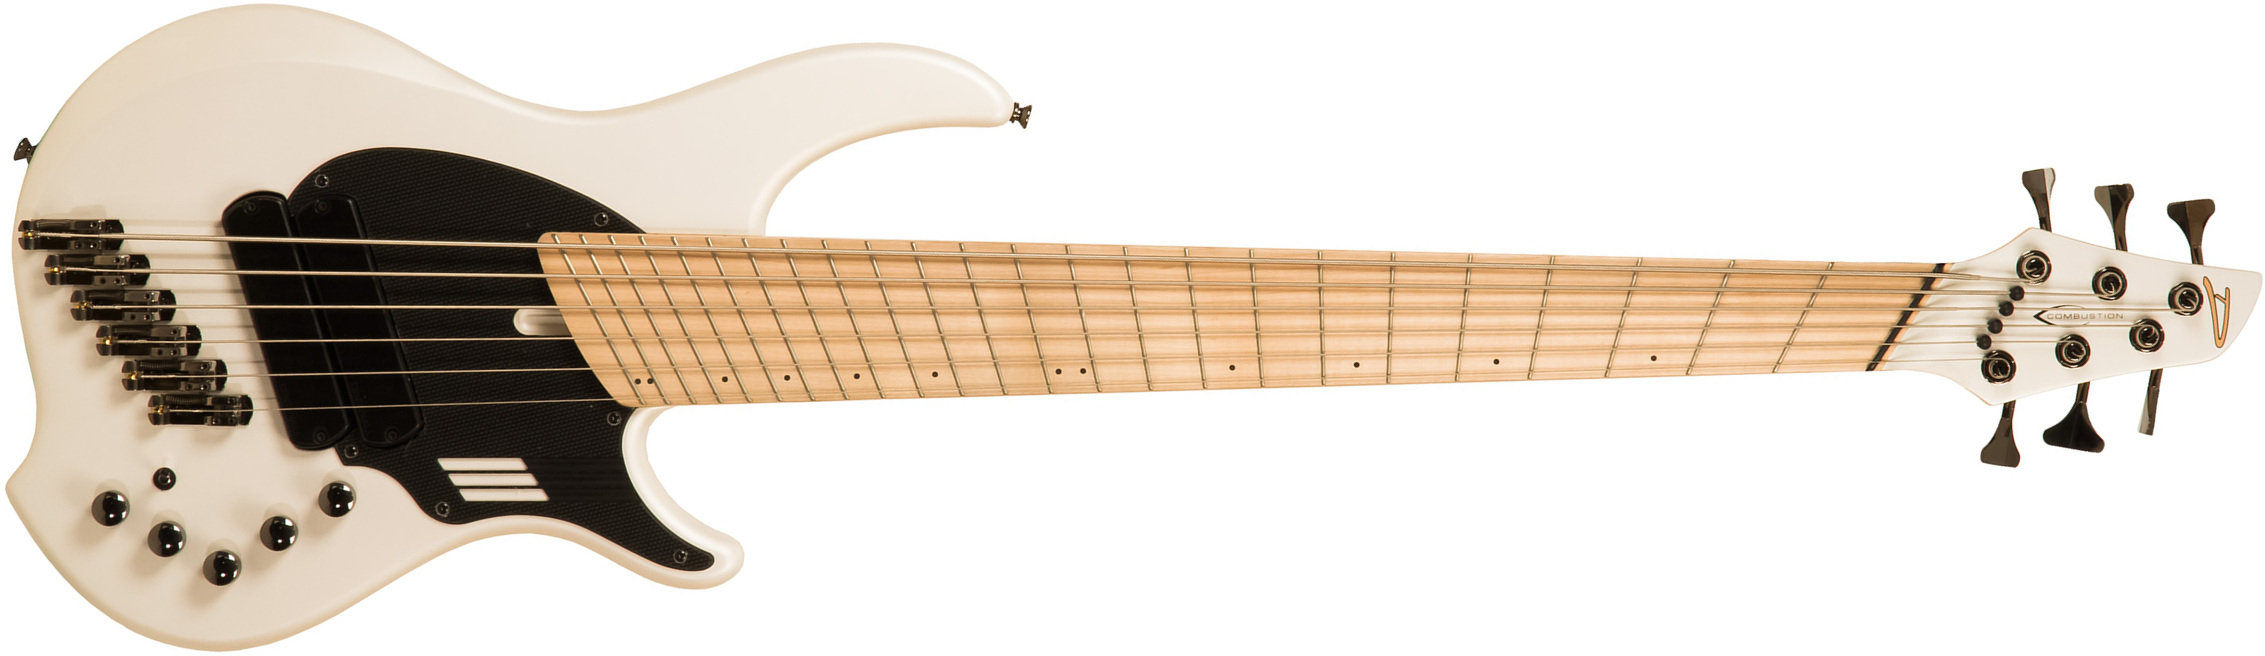 Dingwall Adam Nolly Getgood Ng2 6c 2pu Signature Active Mn - Ducati Pearl White - Basse Électrique Solid Body - Main picture